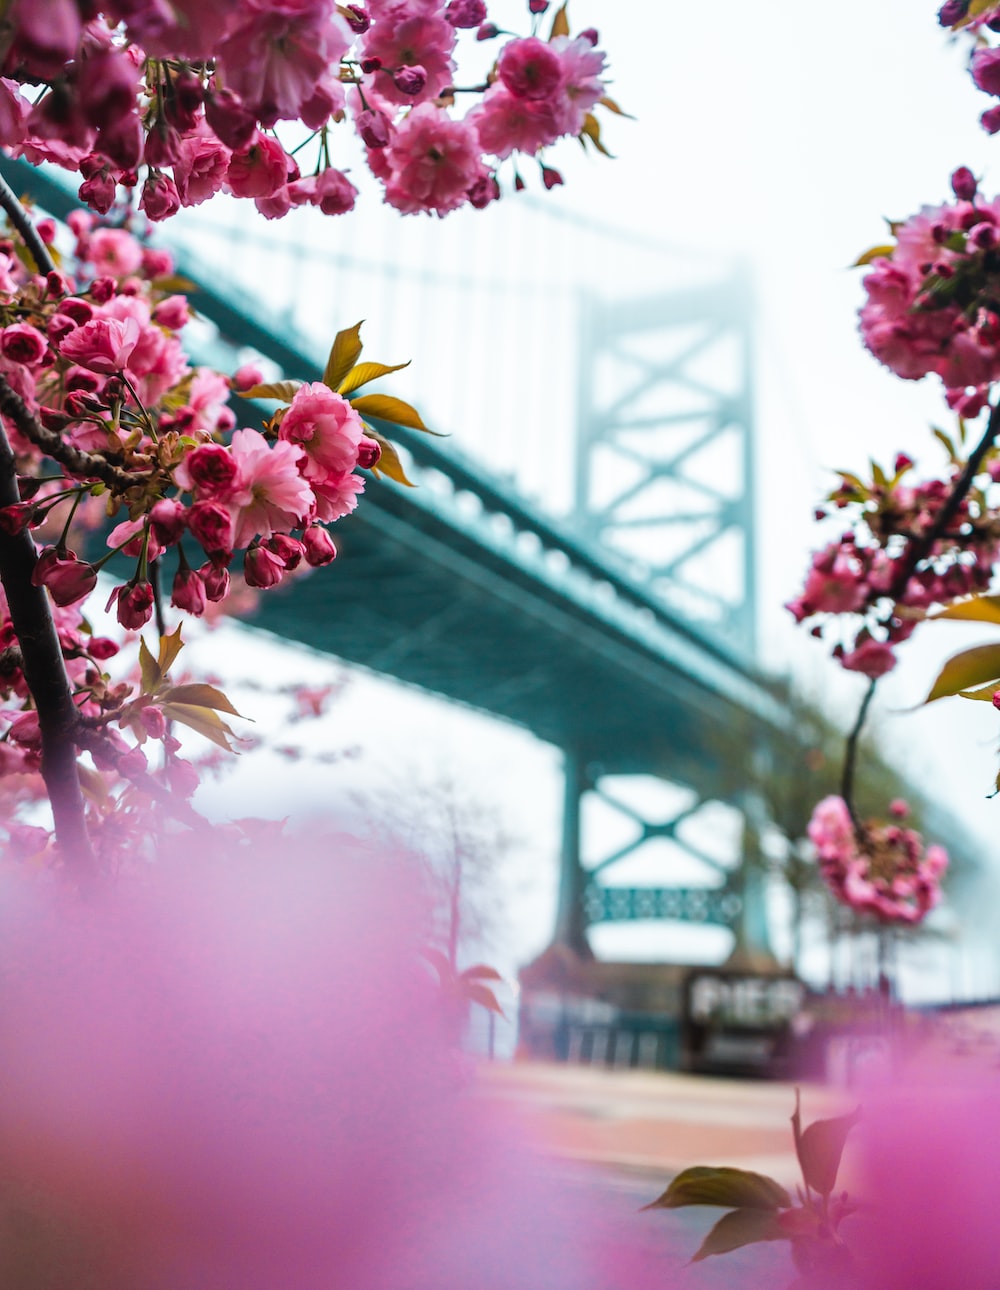 Selective Focus Photography Of Pink Petaled Flowers With A Bridge In The Background Photo